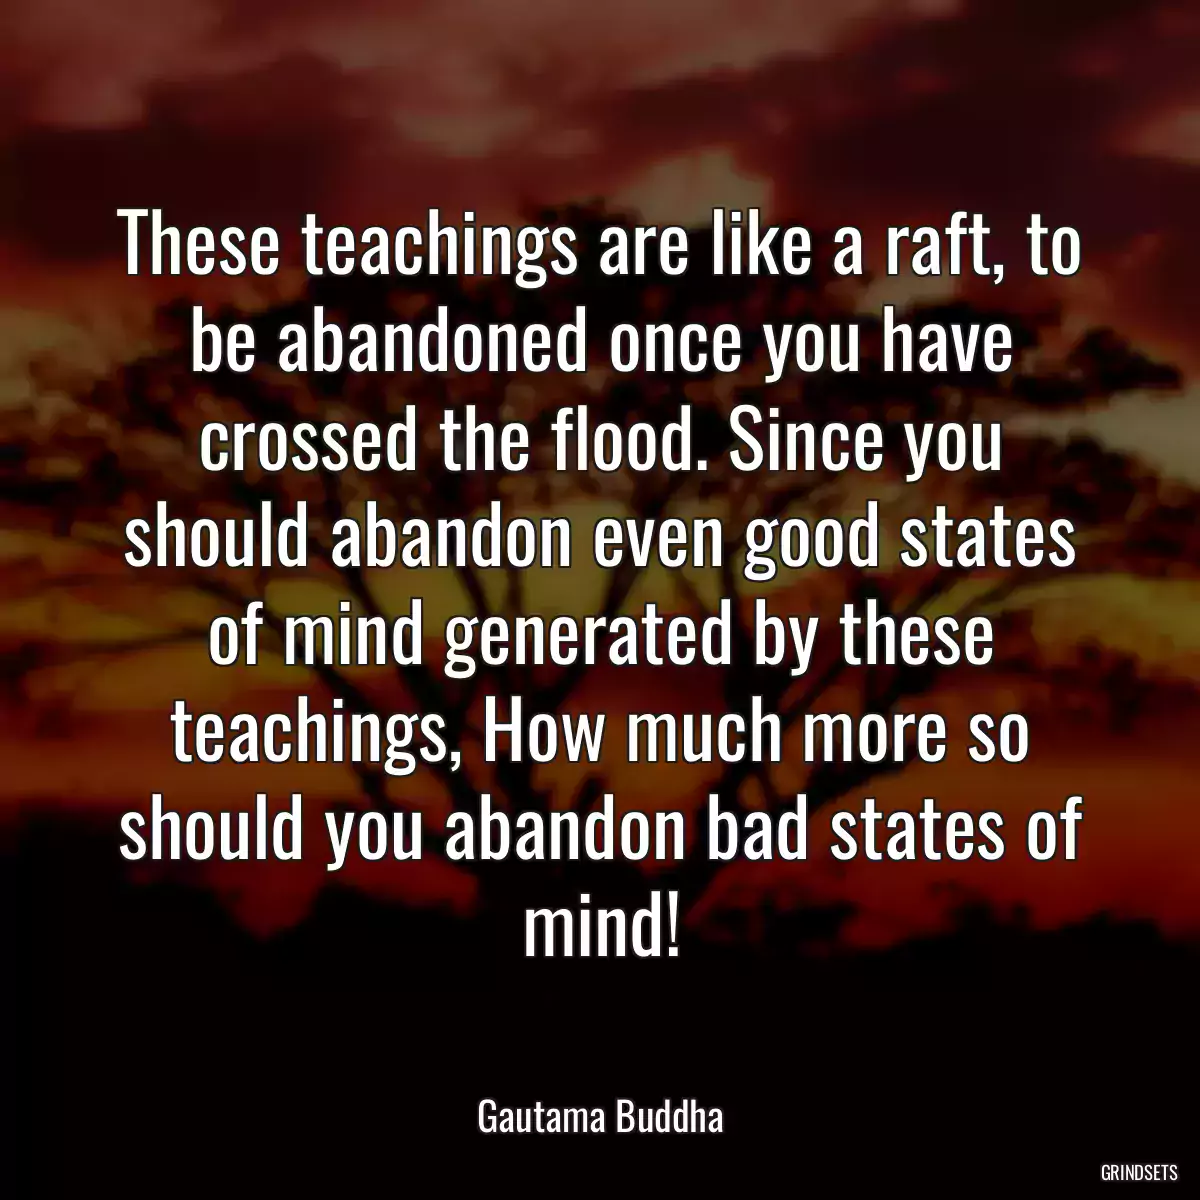 These teachings are like a raft, to be abandoned once you have crossed the flood. Since you should abandon even good states of mind generated by these teachings, How much more so should you abandon bad states of mind!